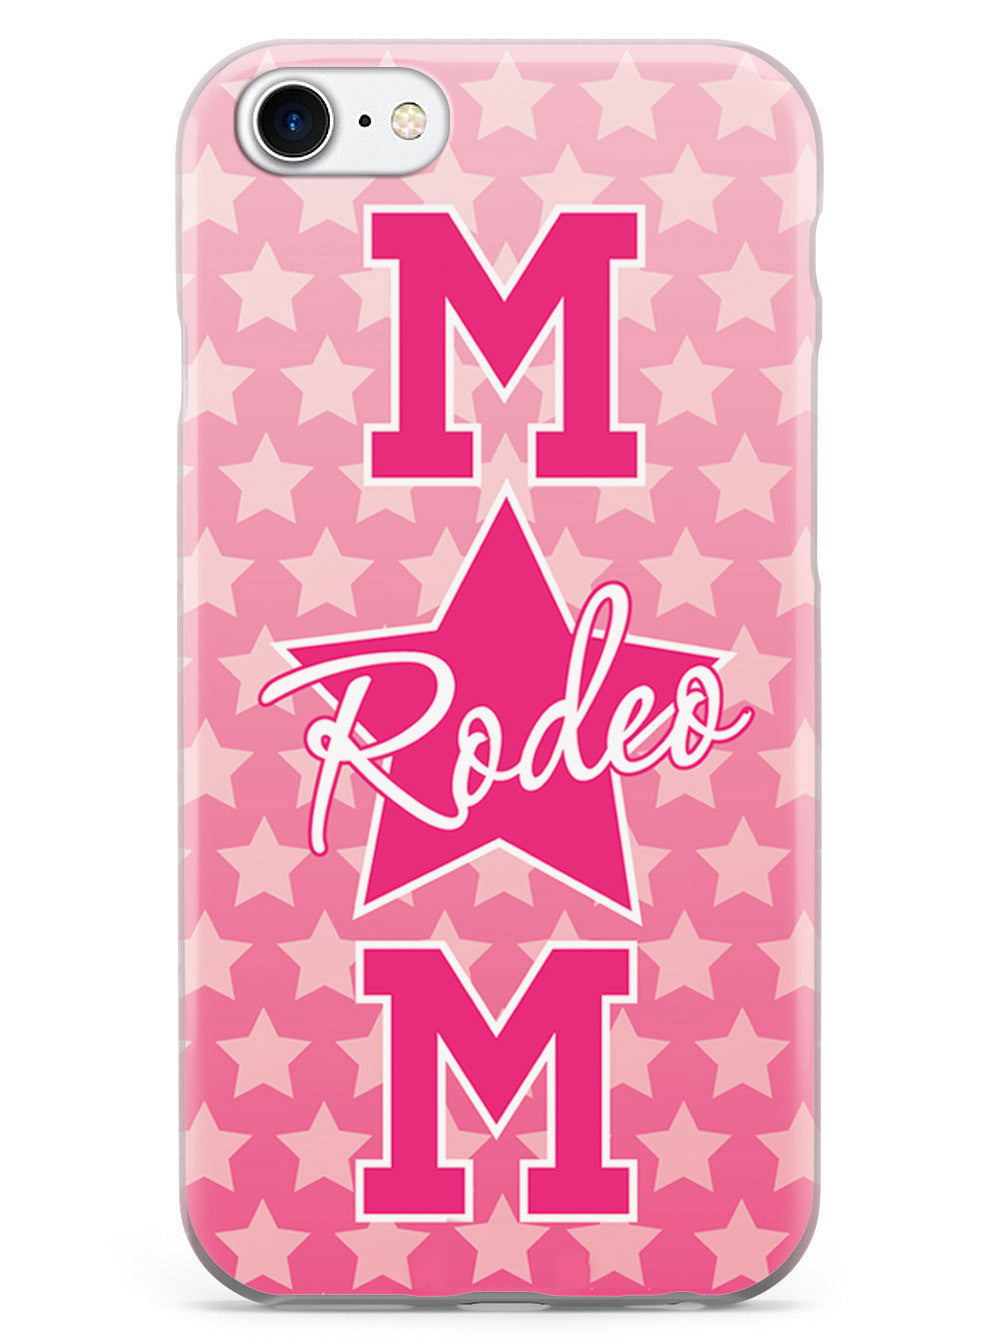 Rodeo Mom Case